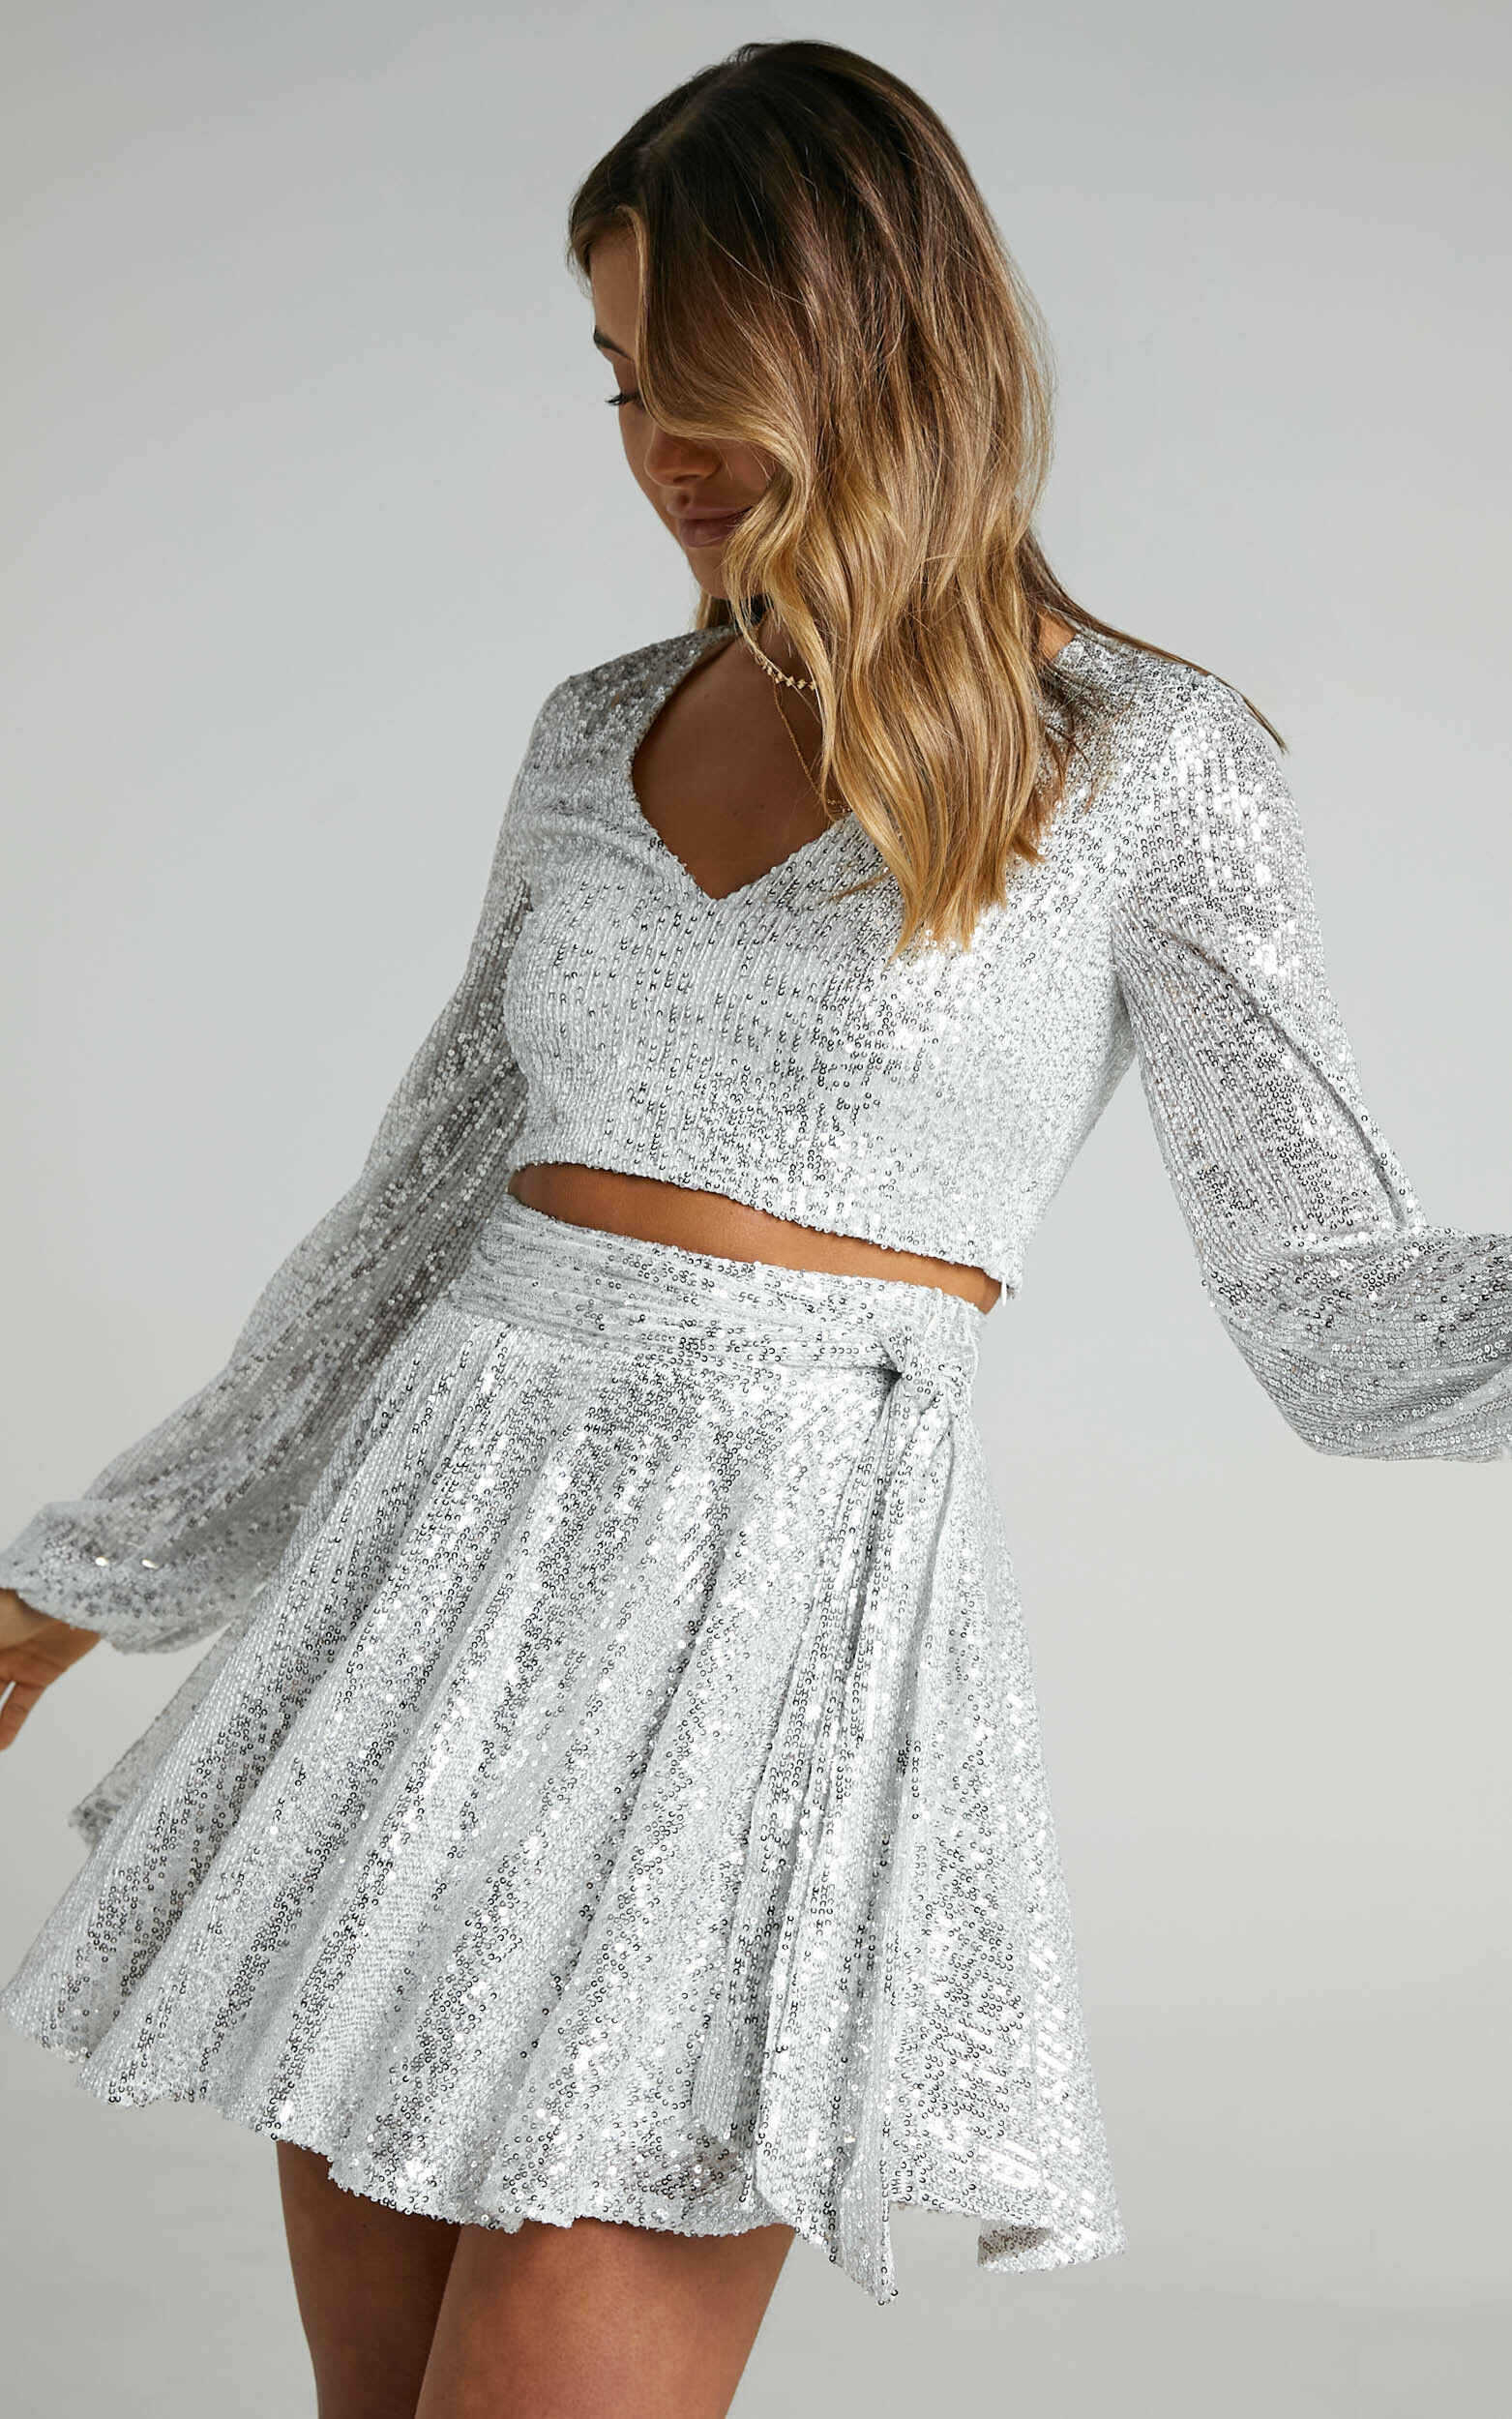 Cami Longsleeve Two Piece Set in Silver Sequin - 06, SLV2, super-hi-res image number null